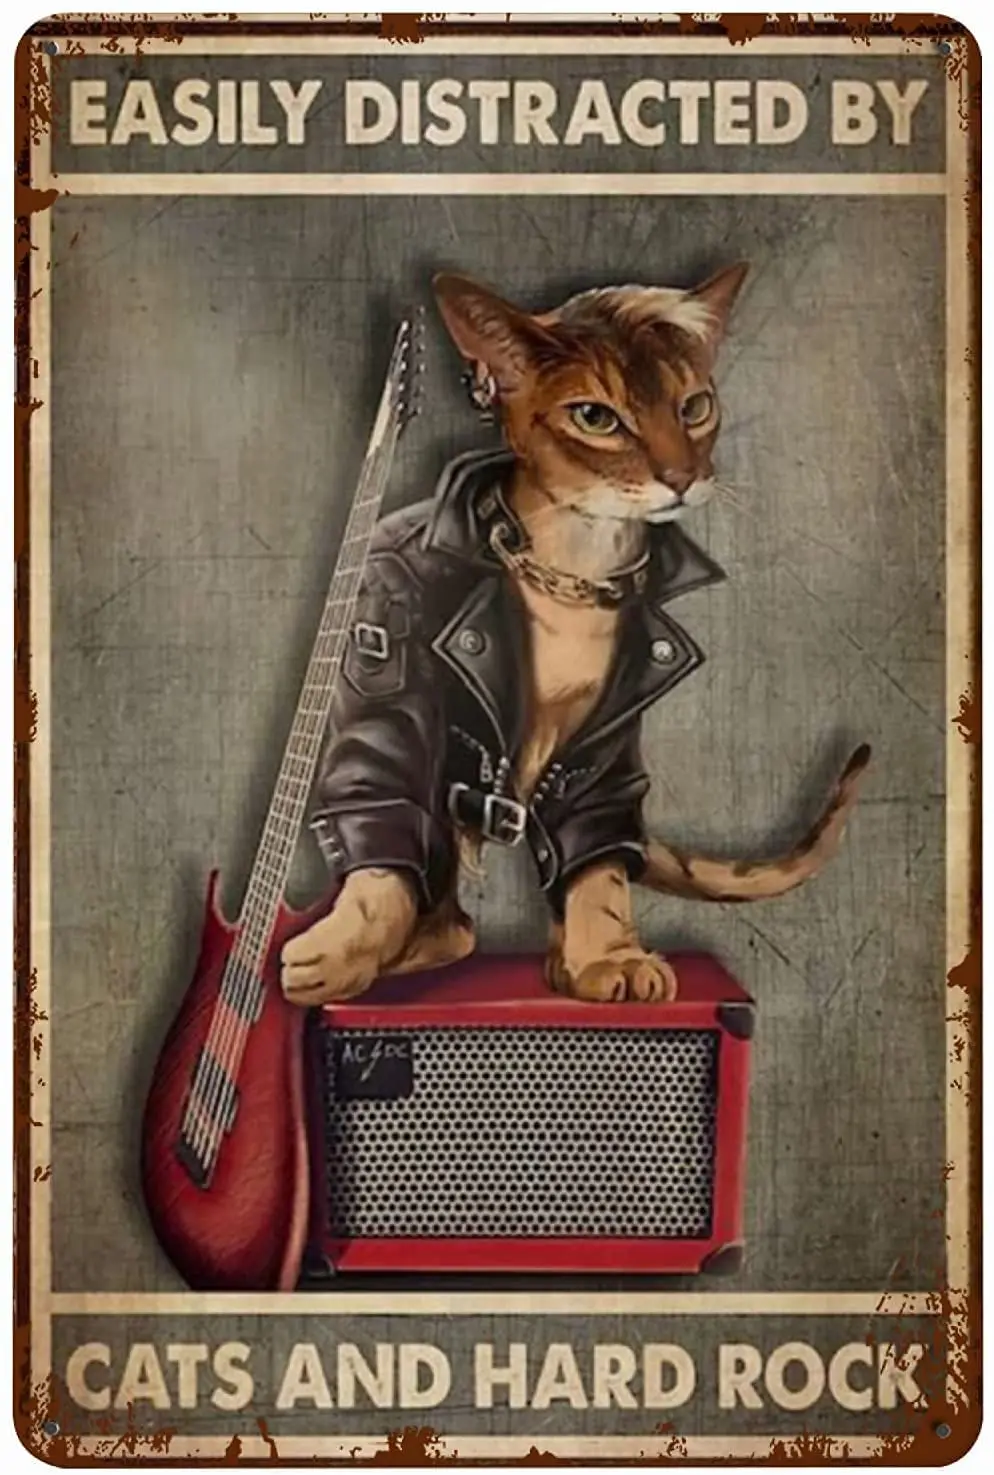 

Easily Distracted by Cats and Hard Rock Metal Tin Signs Wall Decor, Vintage Tin Sign Wall Art Plaque Decoration Mural Funny